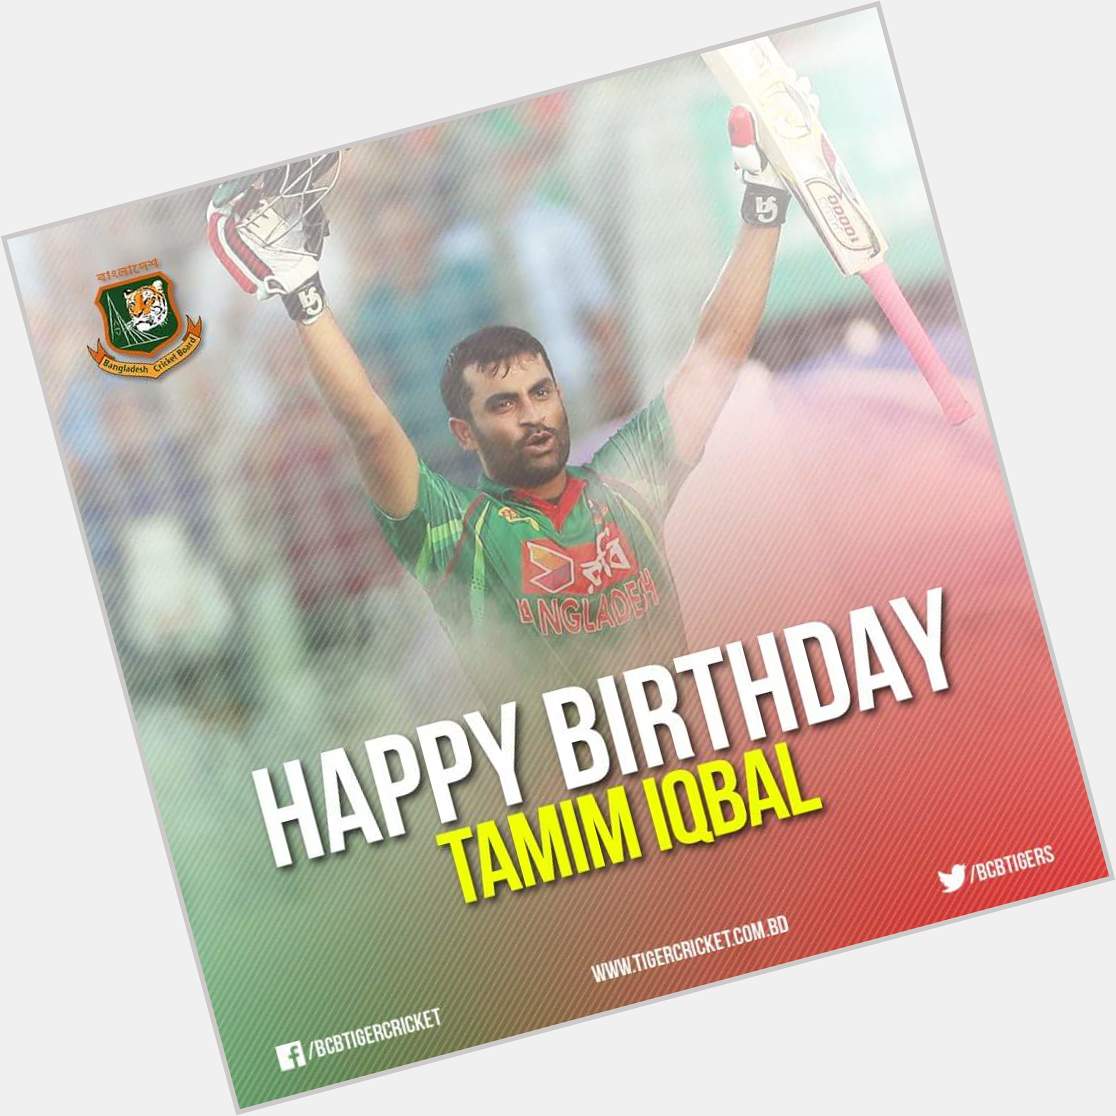 We wish a very happy birthday to our own Tamim Iqbal. Many Many happy returns of the day. 